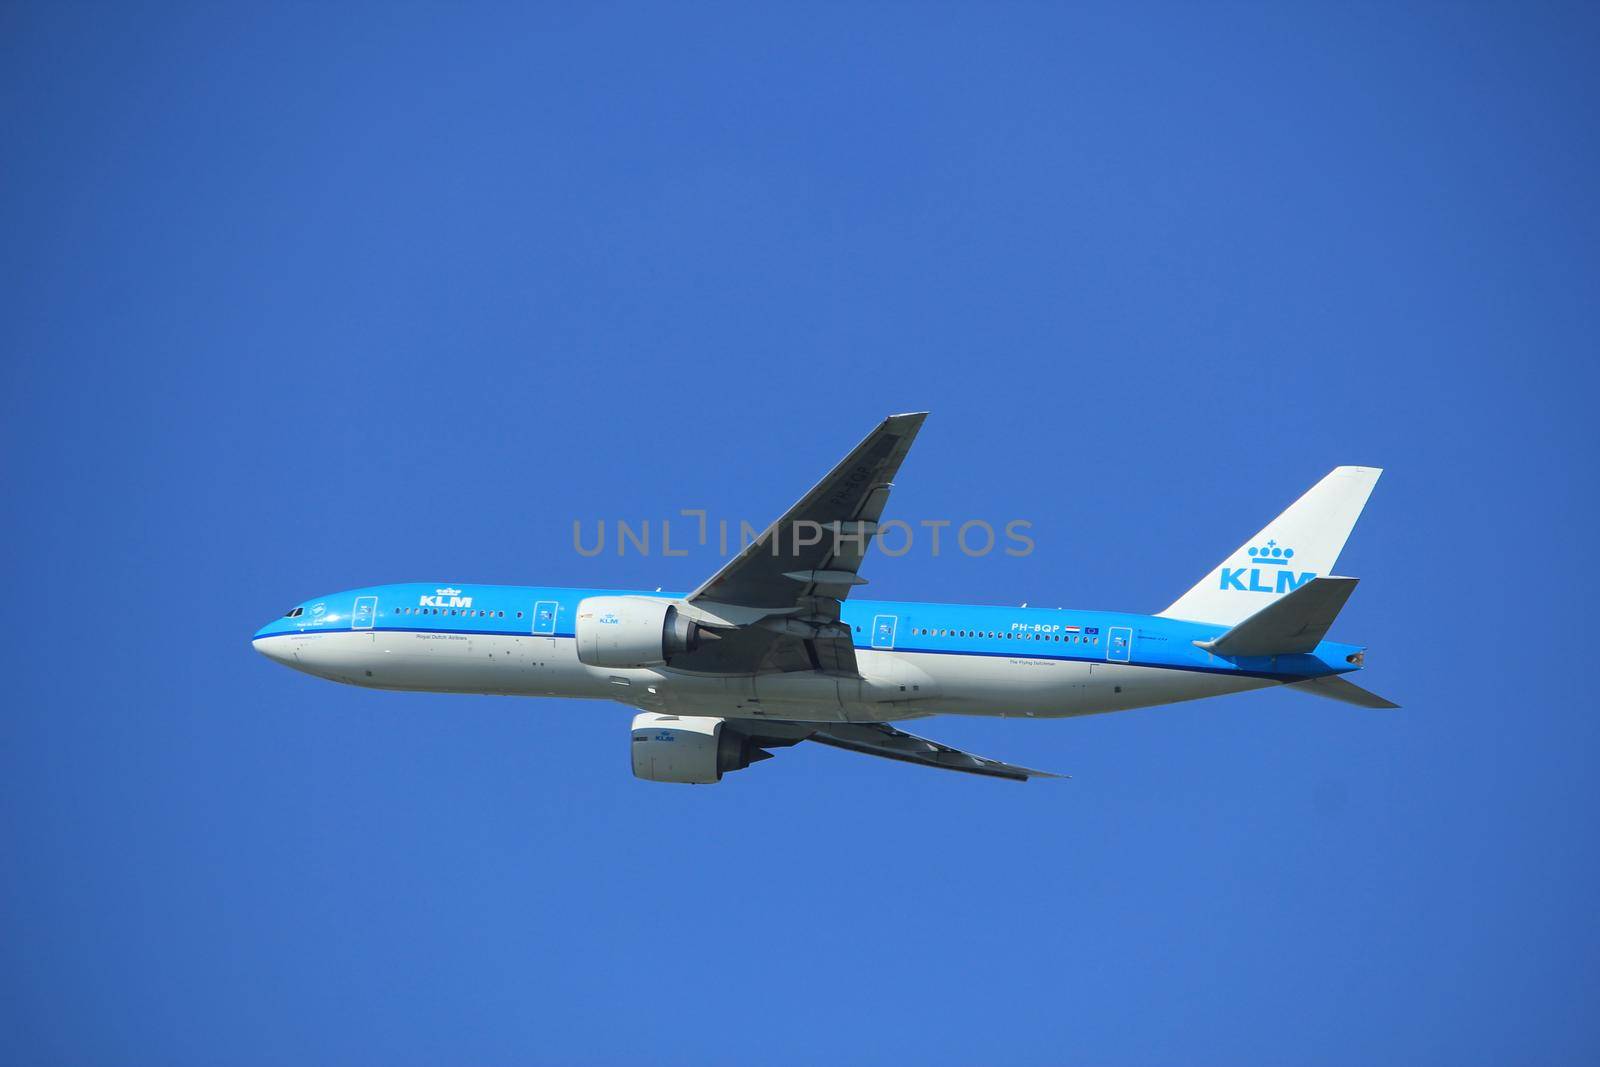 Amsterdam the Netherlands - September 23rd 2017: PH-BQH KLM Royal Dutch Airlines Boeing 777-200 takeoff from Kaagbaan runway, Amsterdam Airport Schiphol